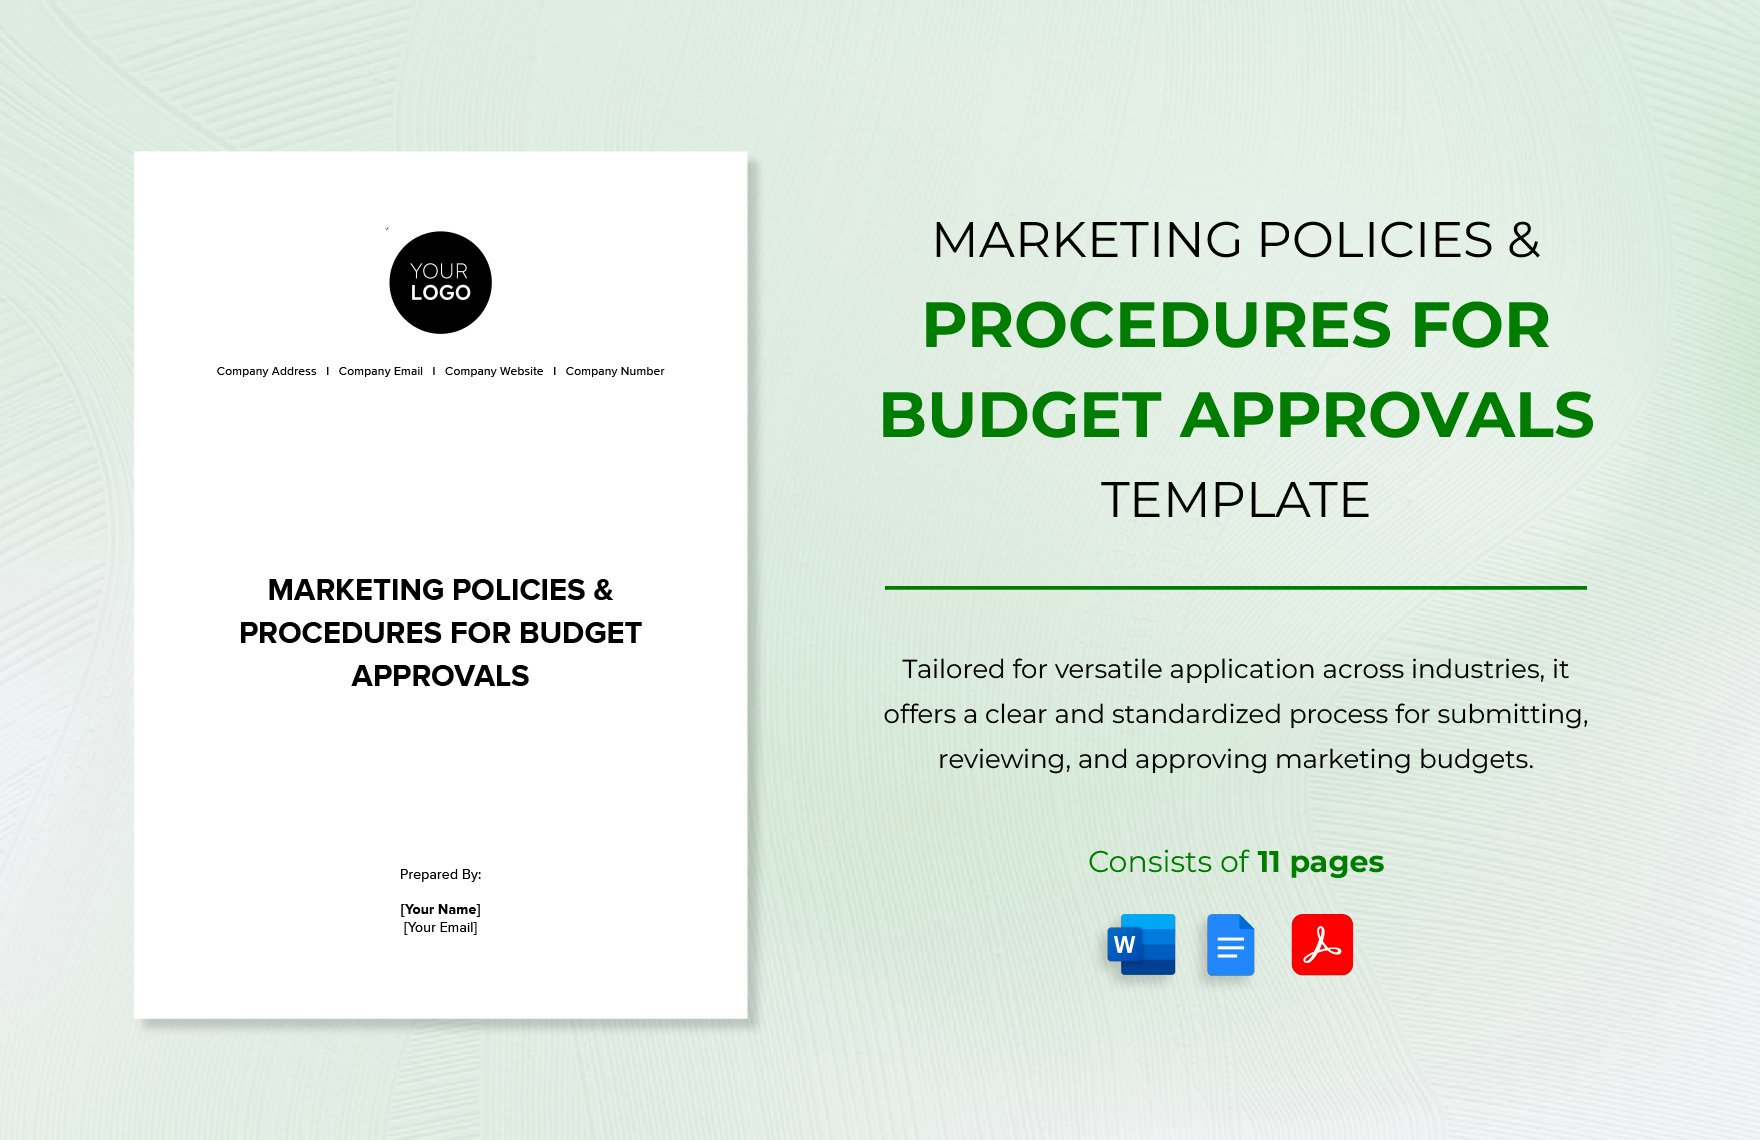 Marketing Policies & Procedures for Budget Approvals Template